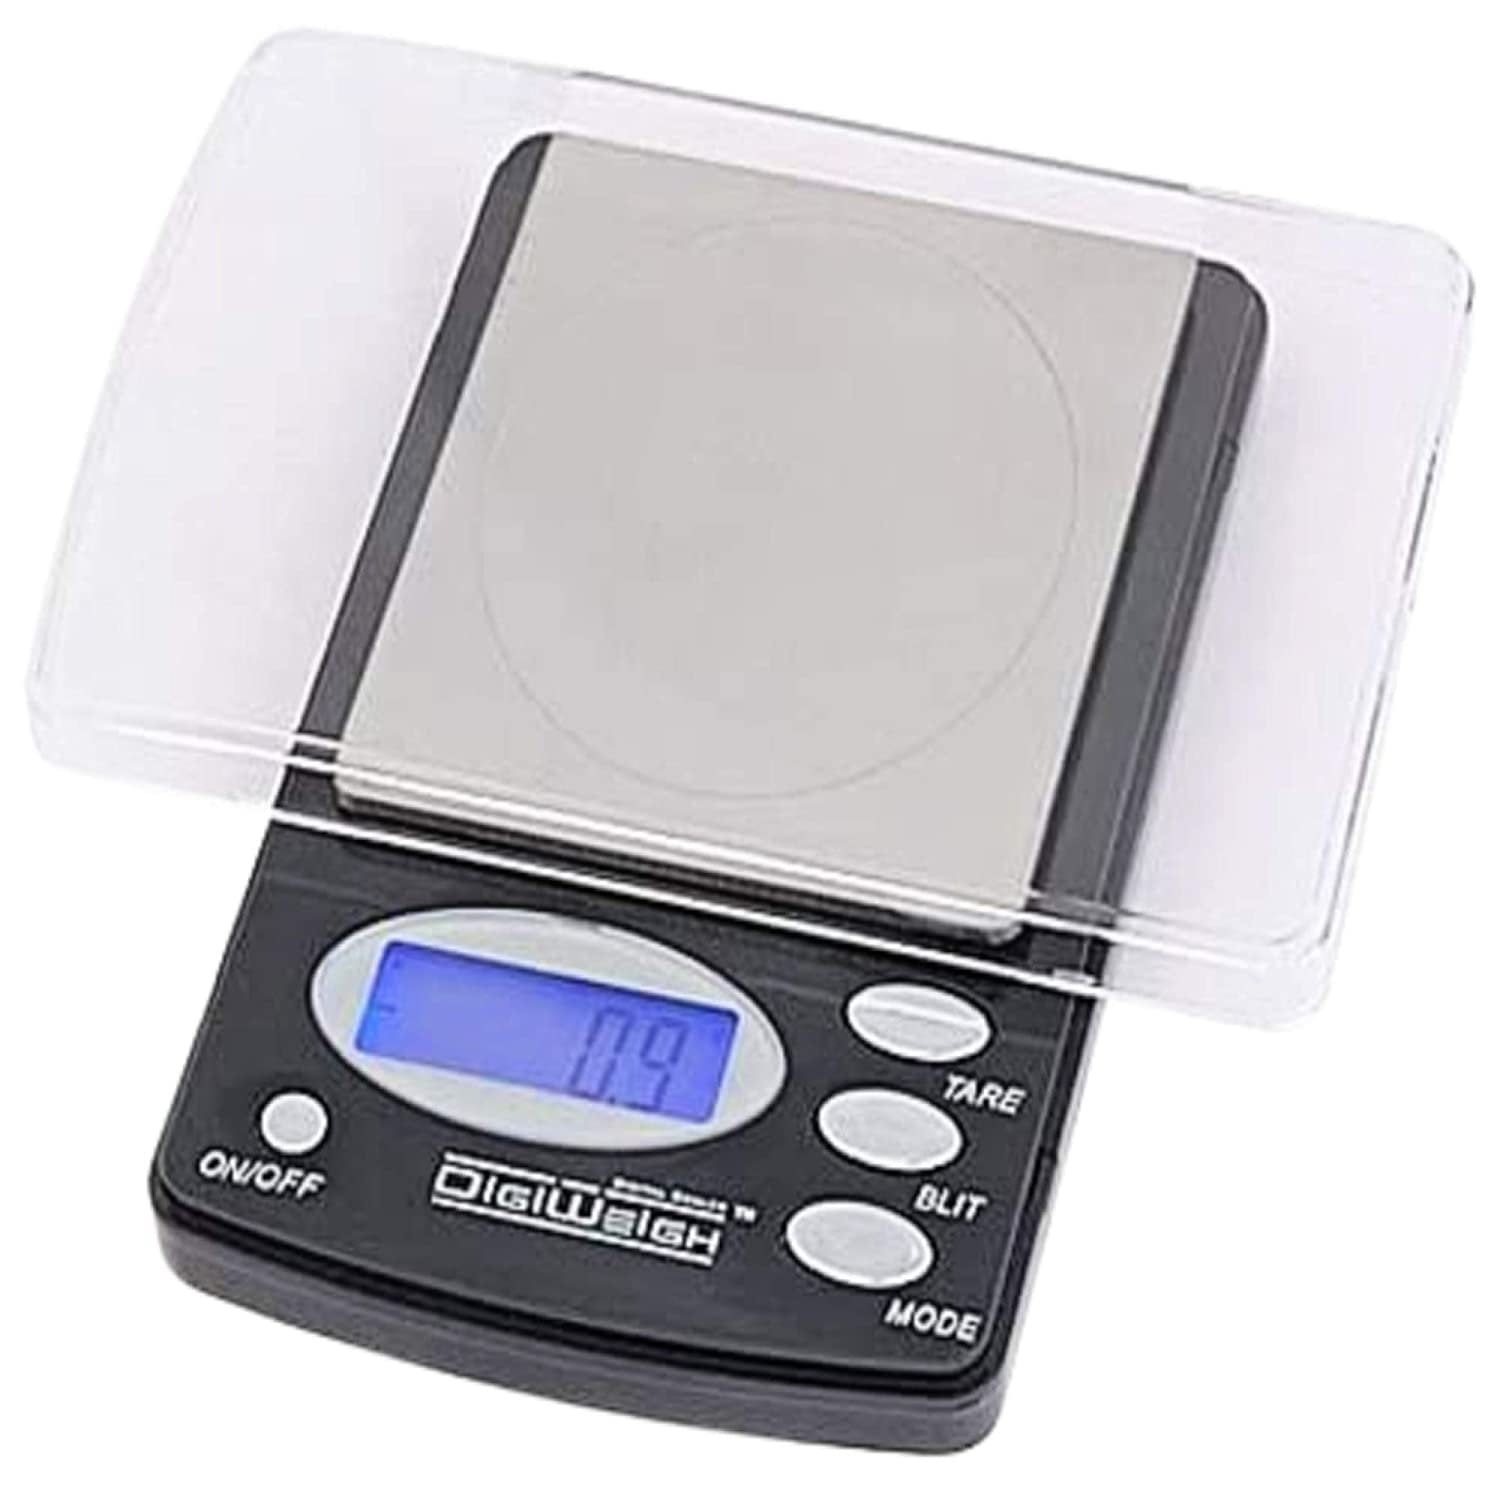 New Troy Ounce Scale with Warranty! 1000g x 0.1g and Weigh Over 30 ozt!  Professional Coin Balance